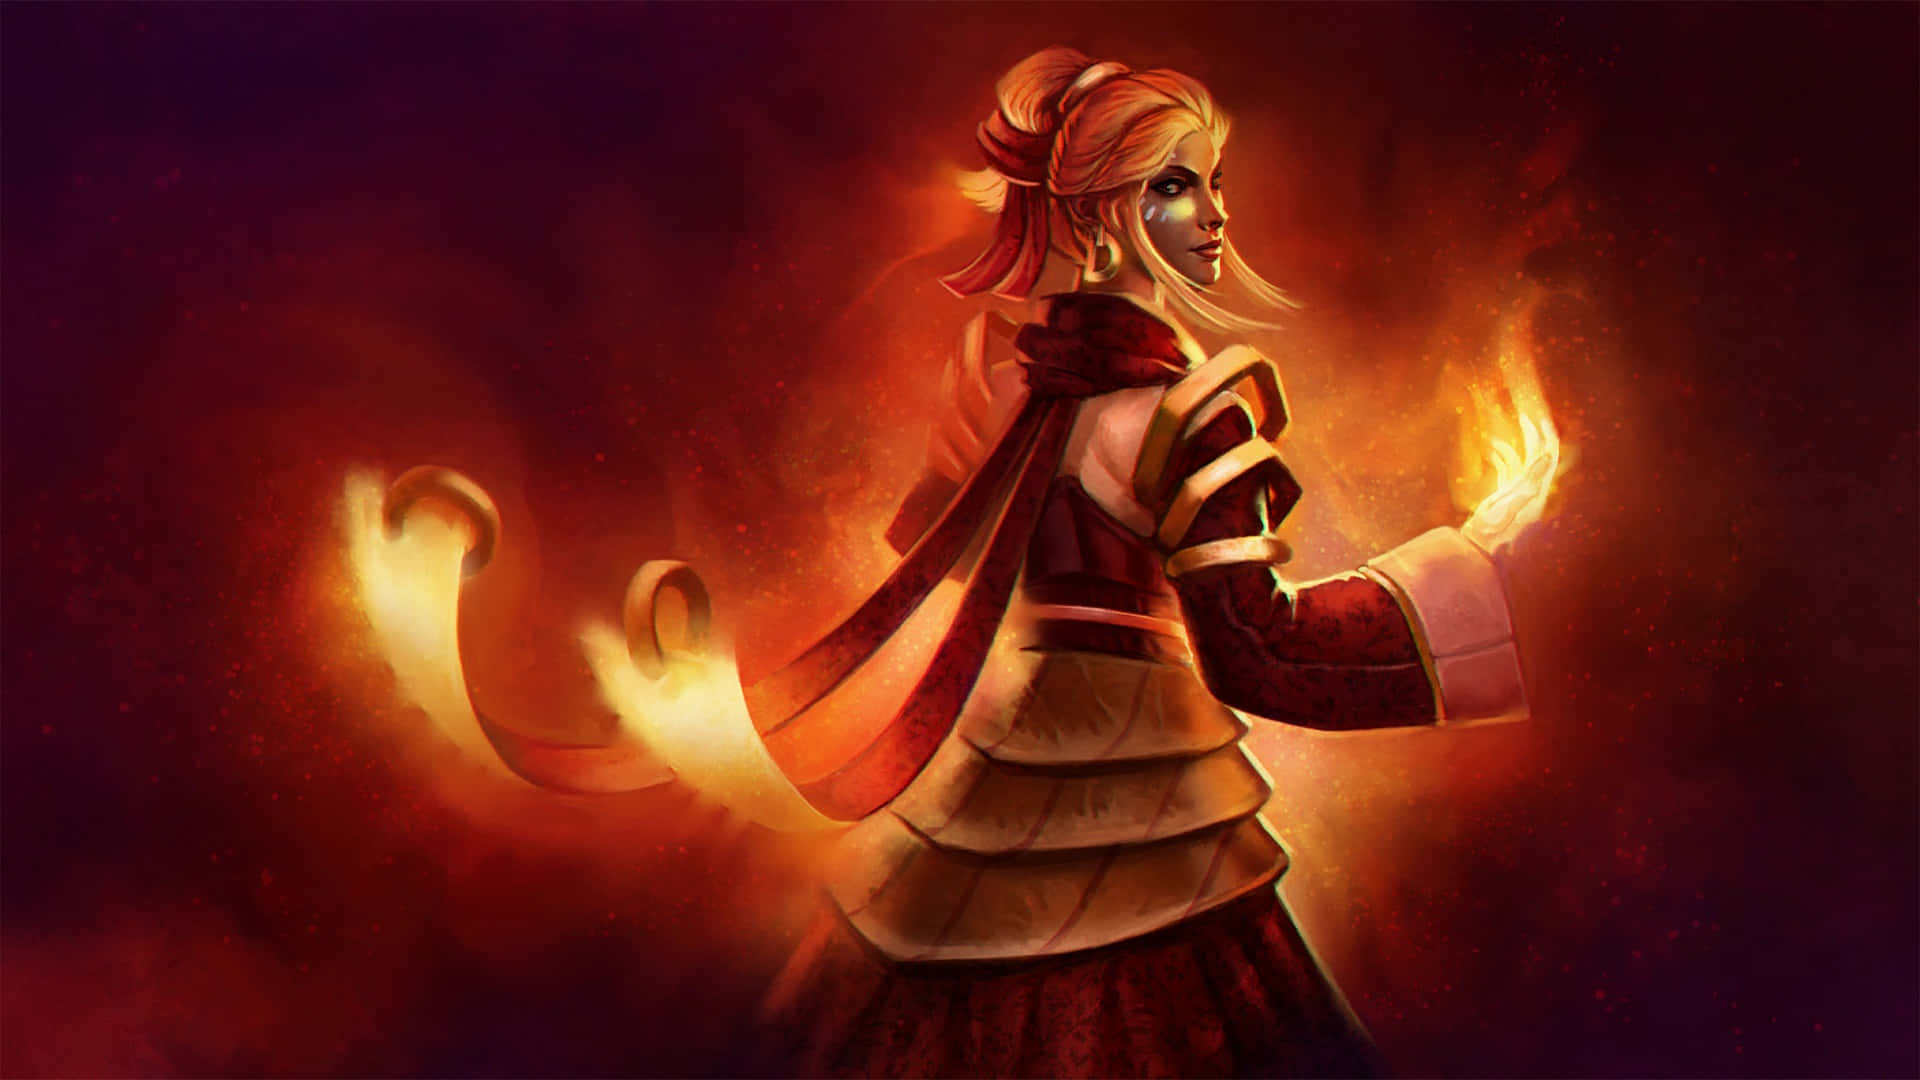 Fiery Mage: Dota 2 Lina In Action Wallpaper